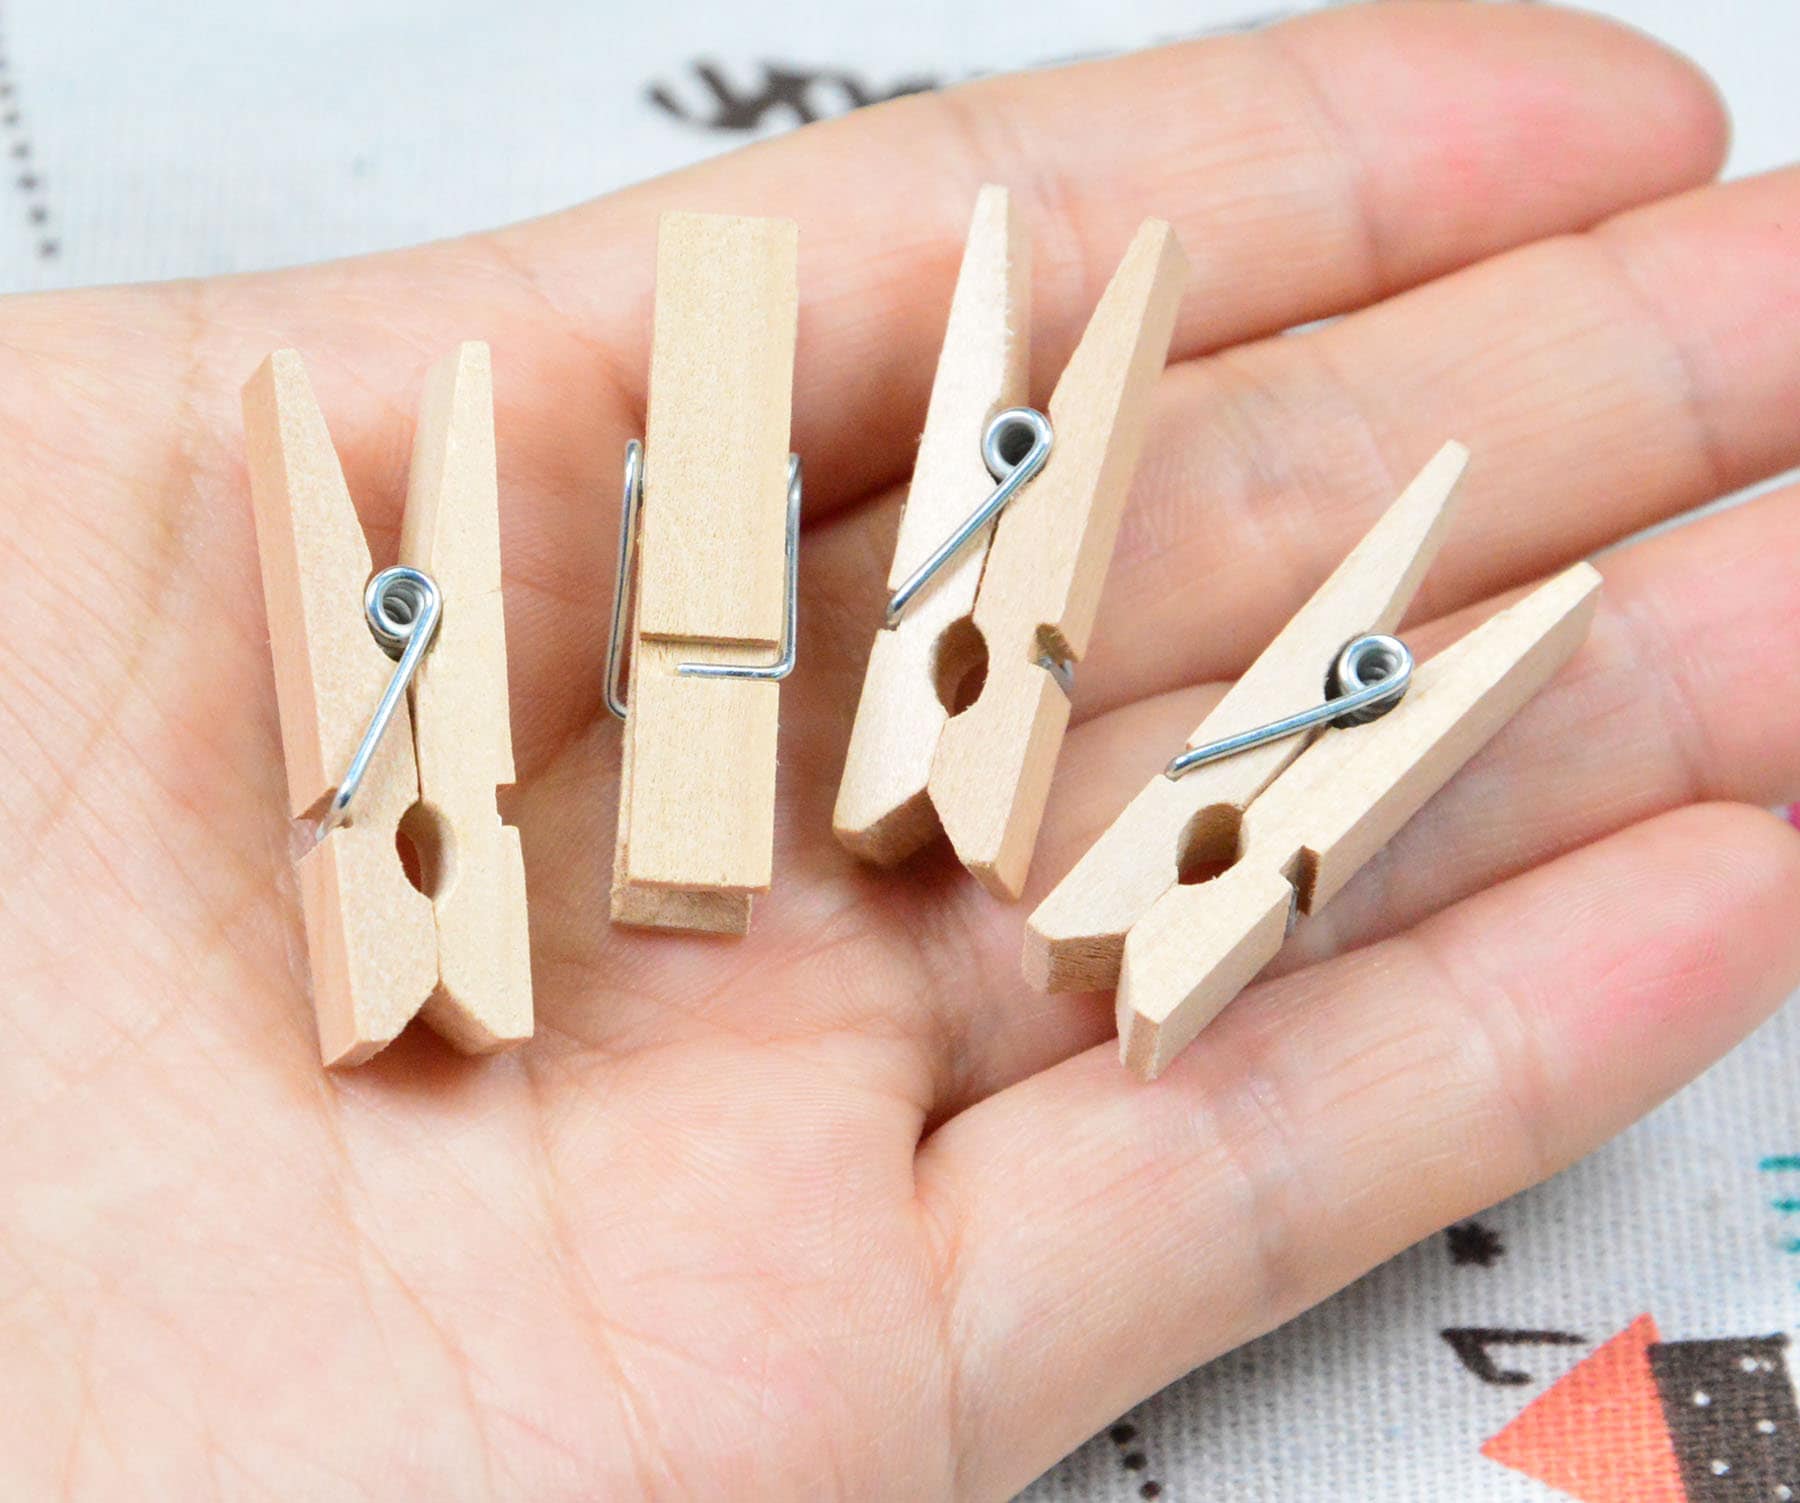 100 Pcs Wooden Clip Wood Trim Wood Clothes pin Household Decor Laundry  Hanging Clips Small Wood Closepins Clips Clothes pins Wooden Small Clothes  pins